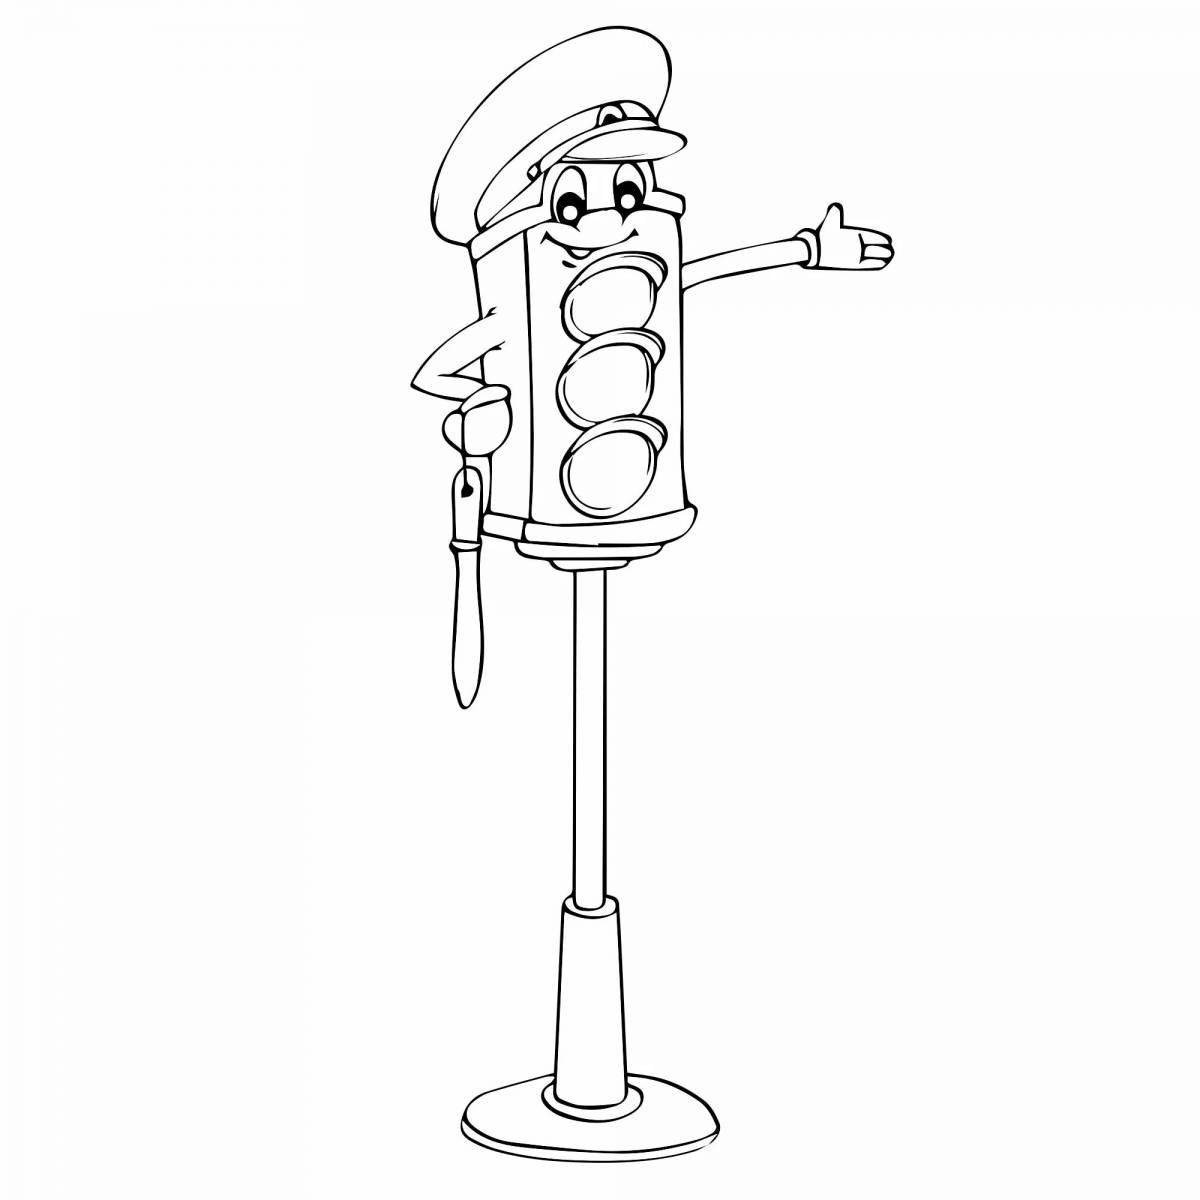 Playful traffic light coloring page